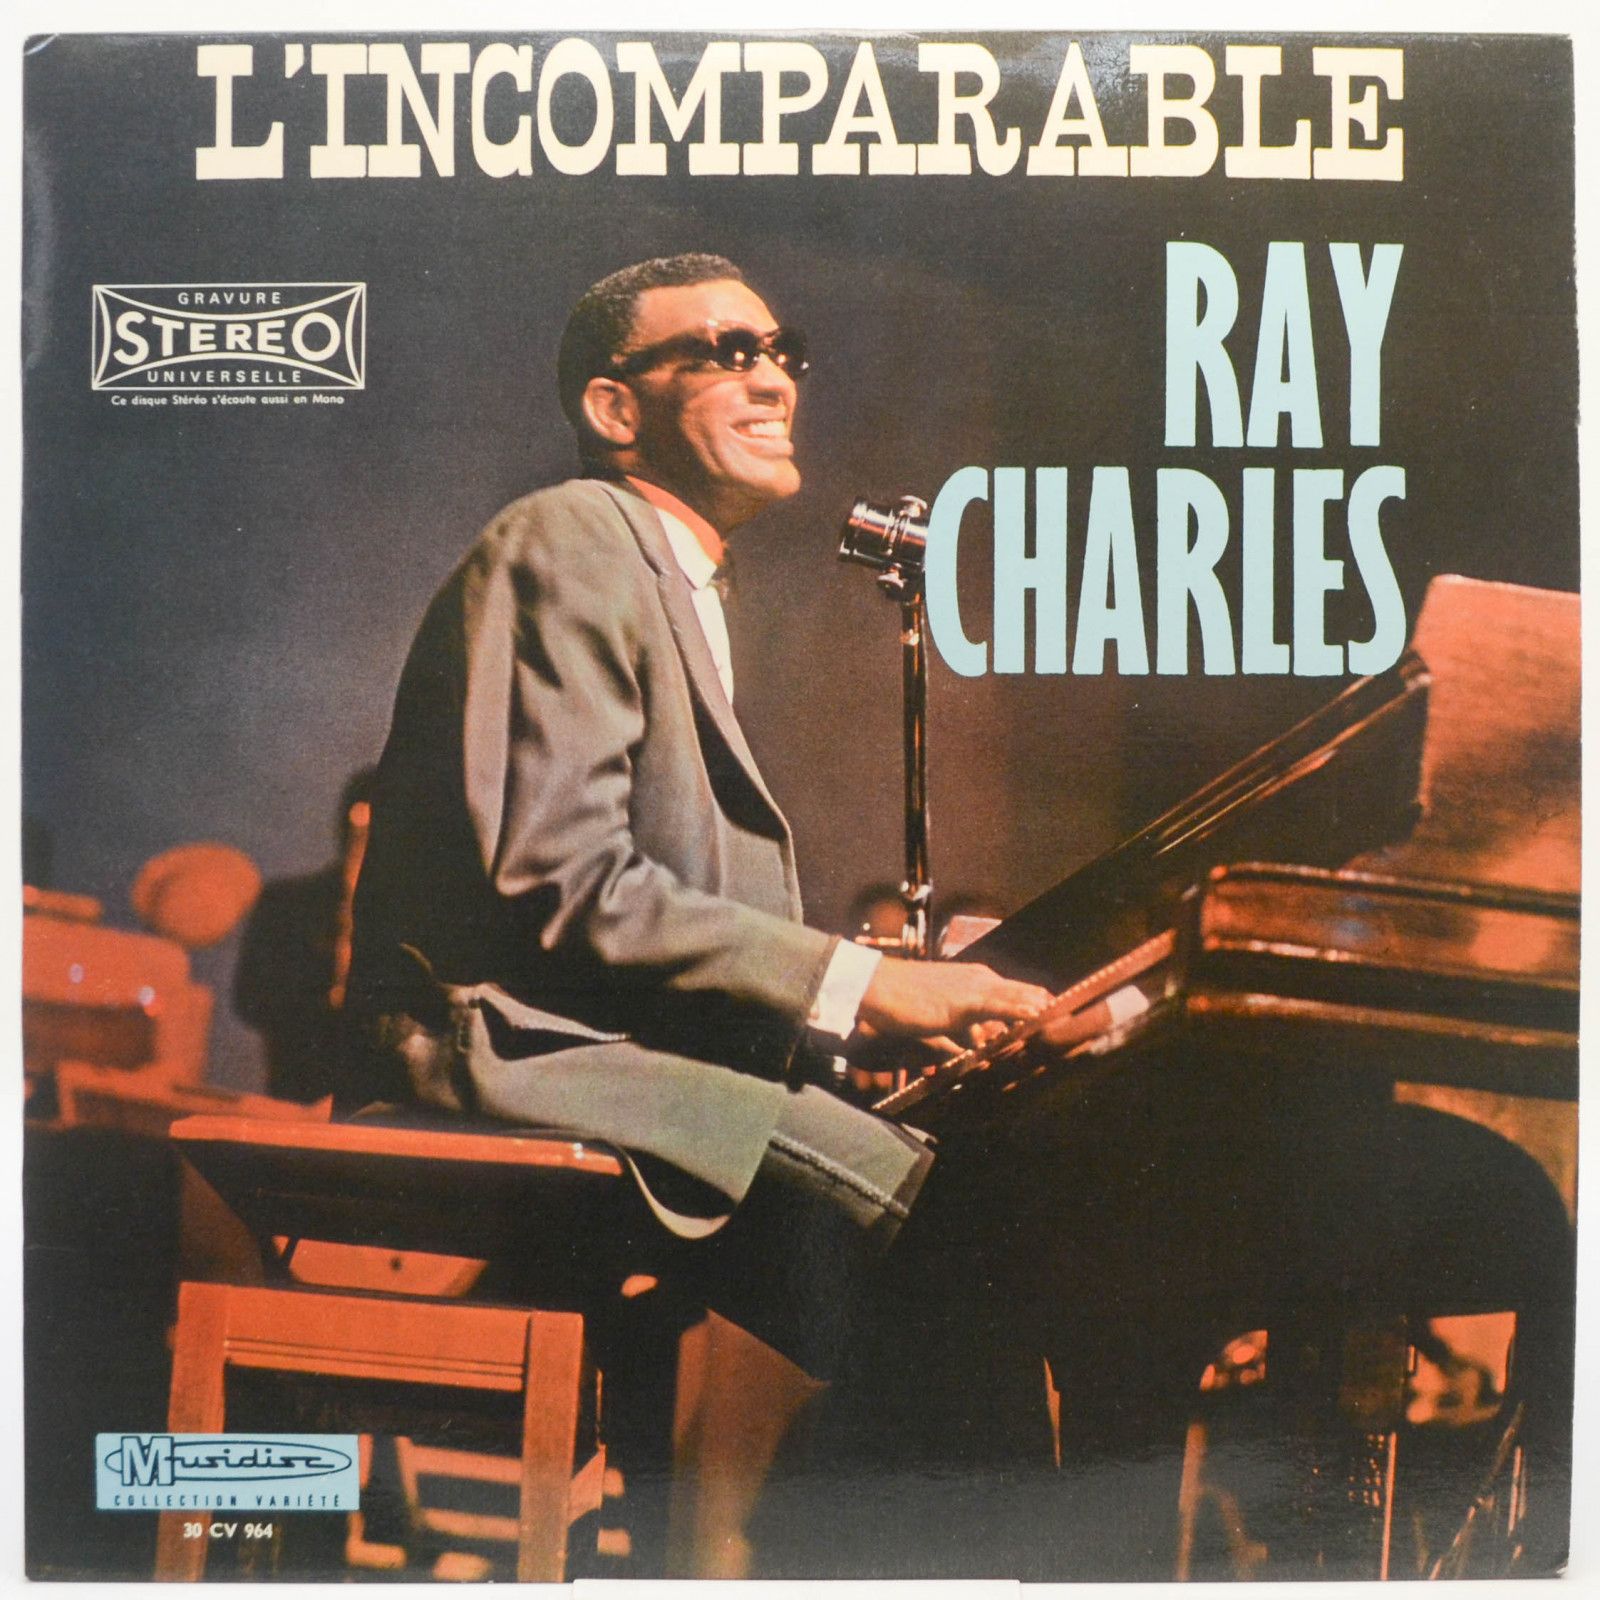 Ray Charles — L'Incomparable, 1963